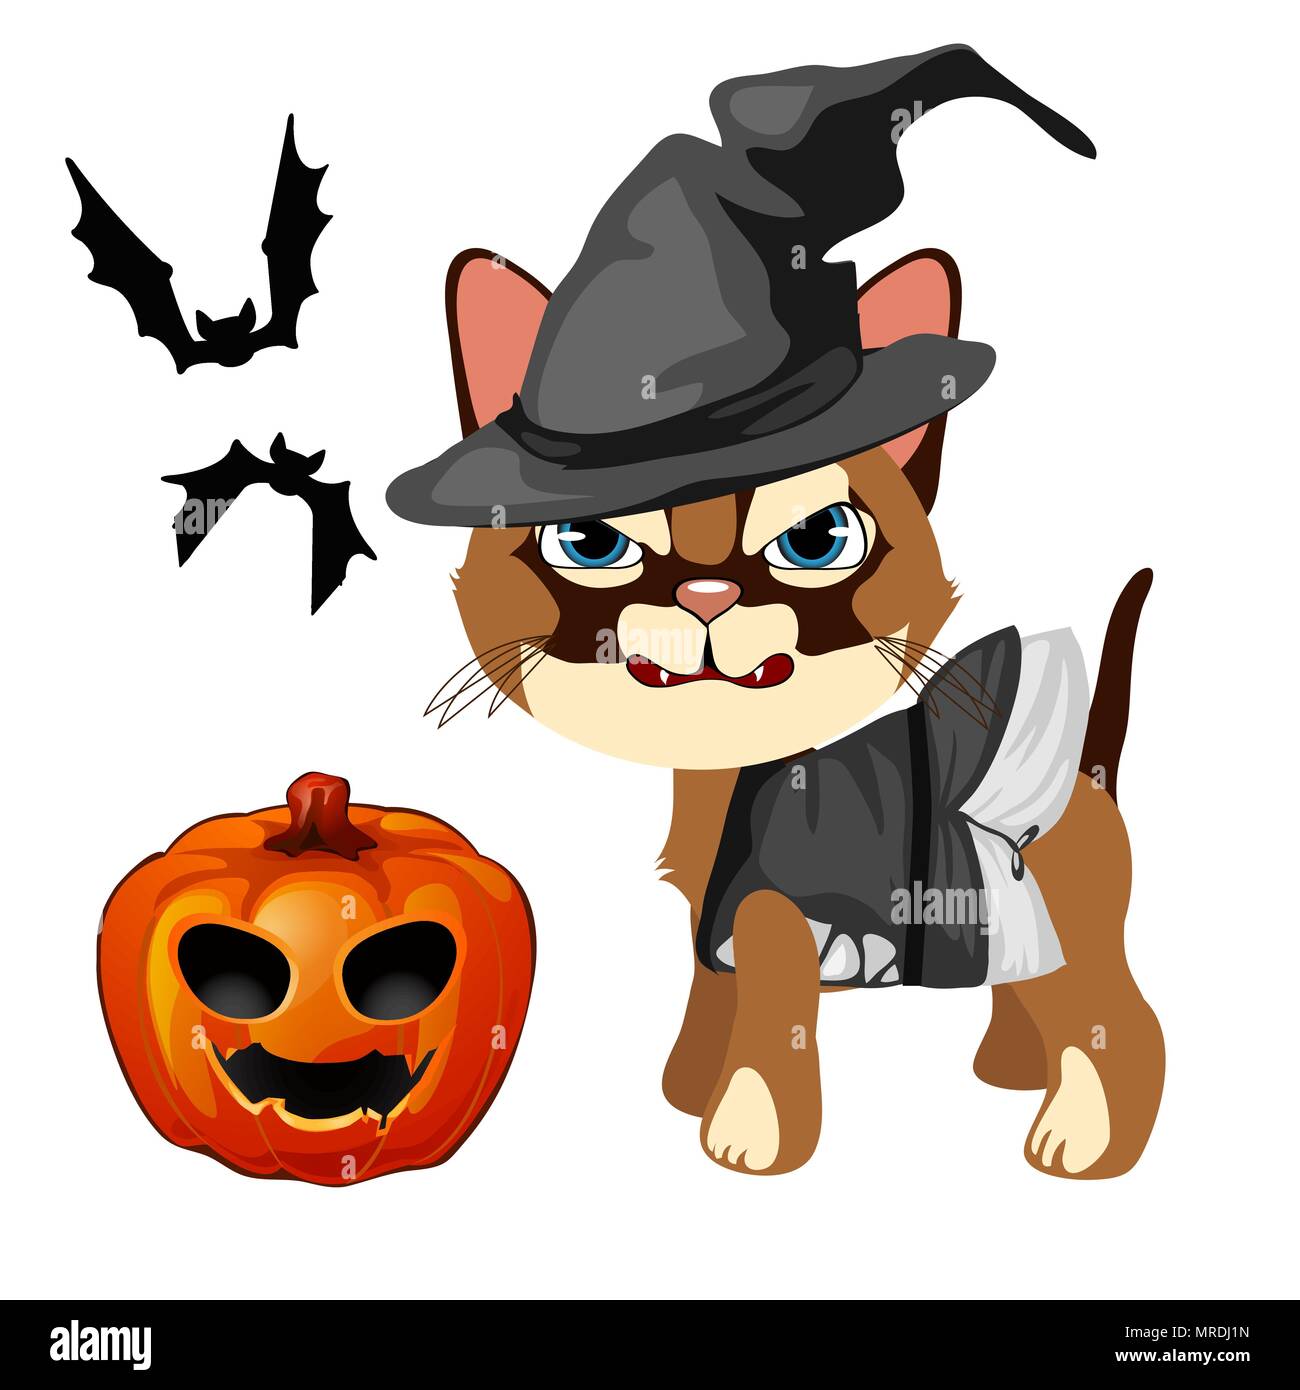 Angry cat in the hat witch bares his sharp teeth. Pumpkin with carved eyes and mouth, bats. The set of attributes of the holiday Halloween. Vector illustration. Stock Vector